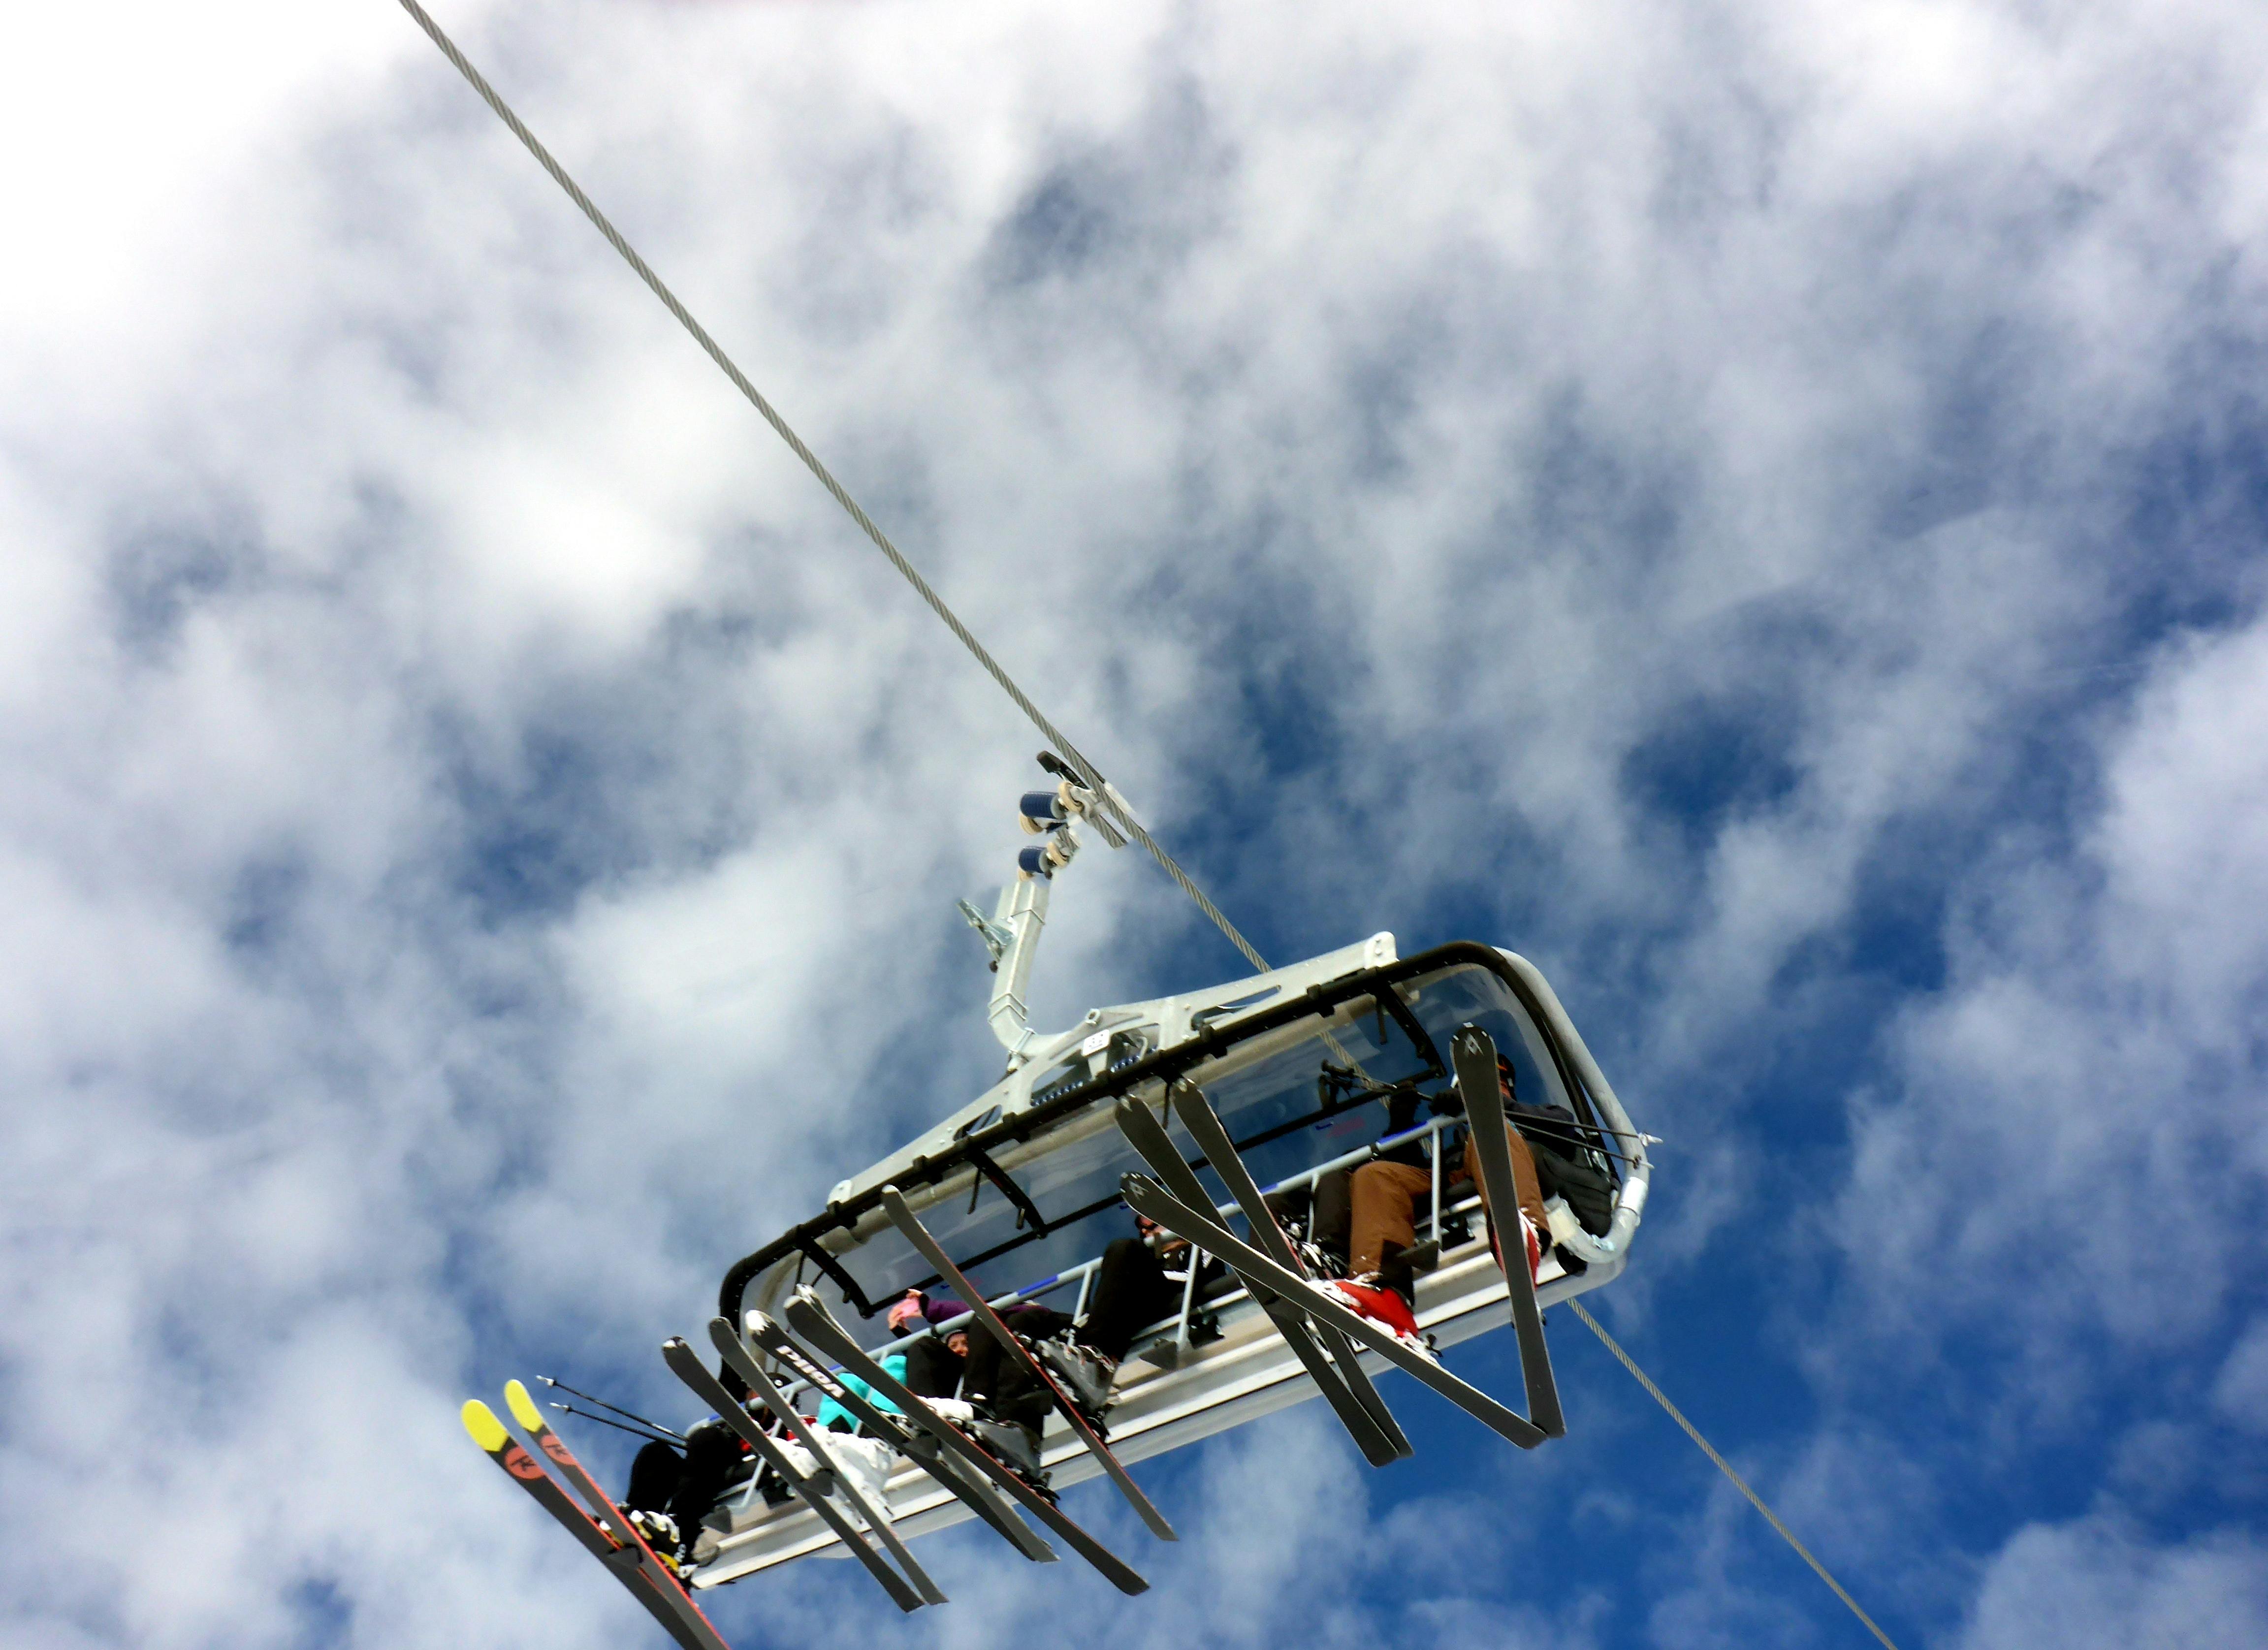 A view of a chairlift with four skiers on it from below.